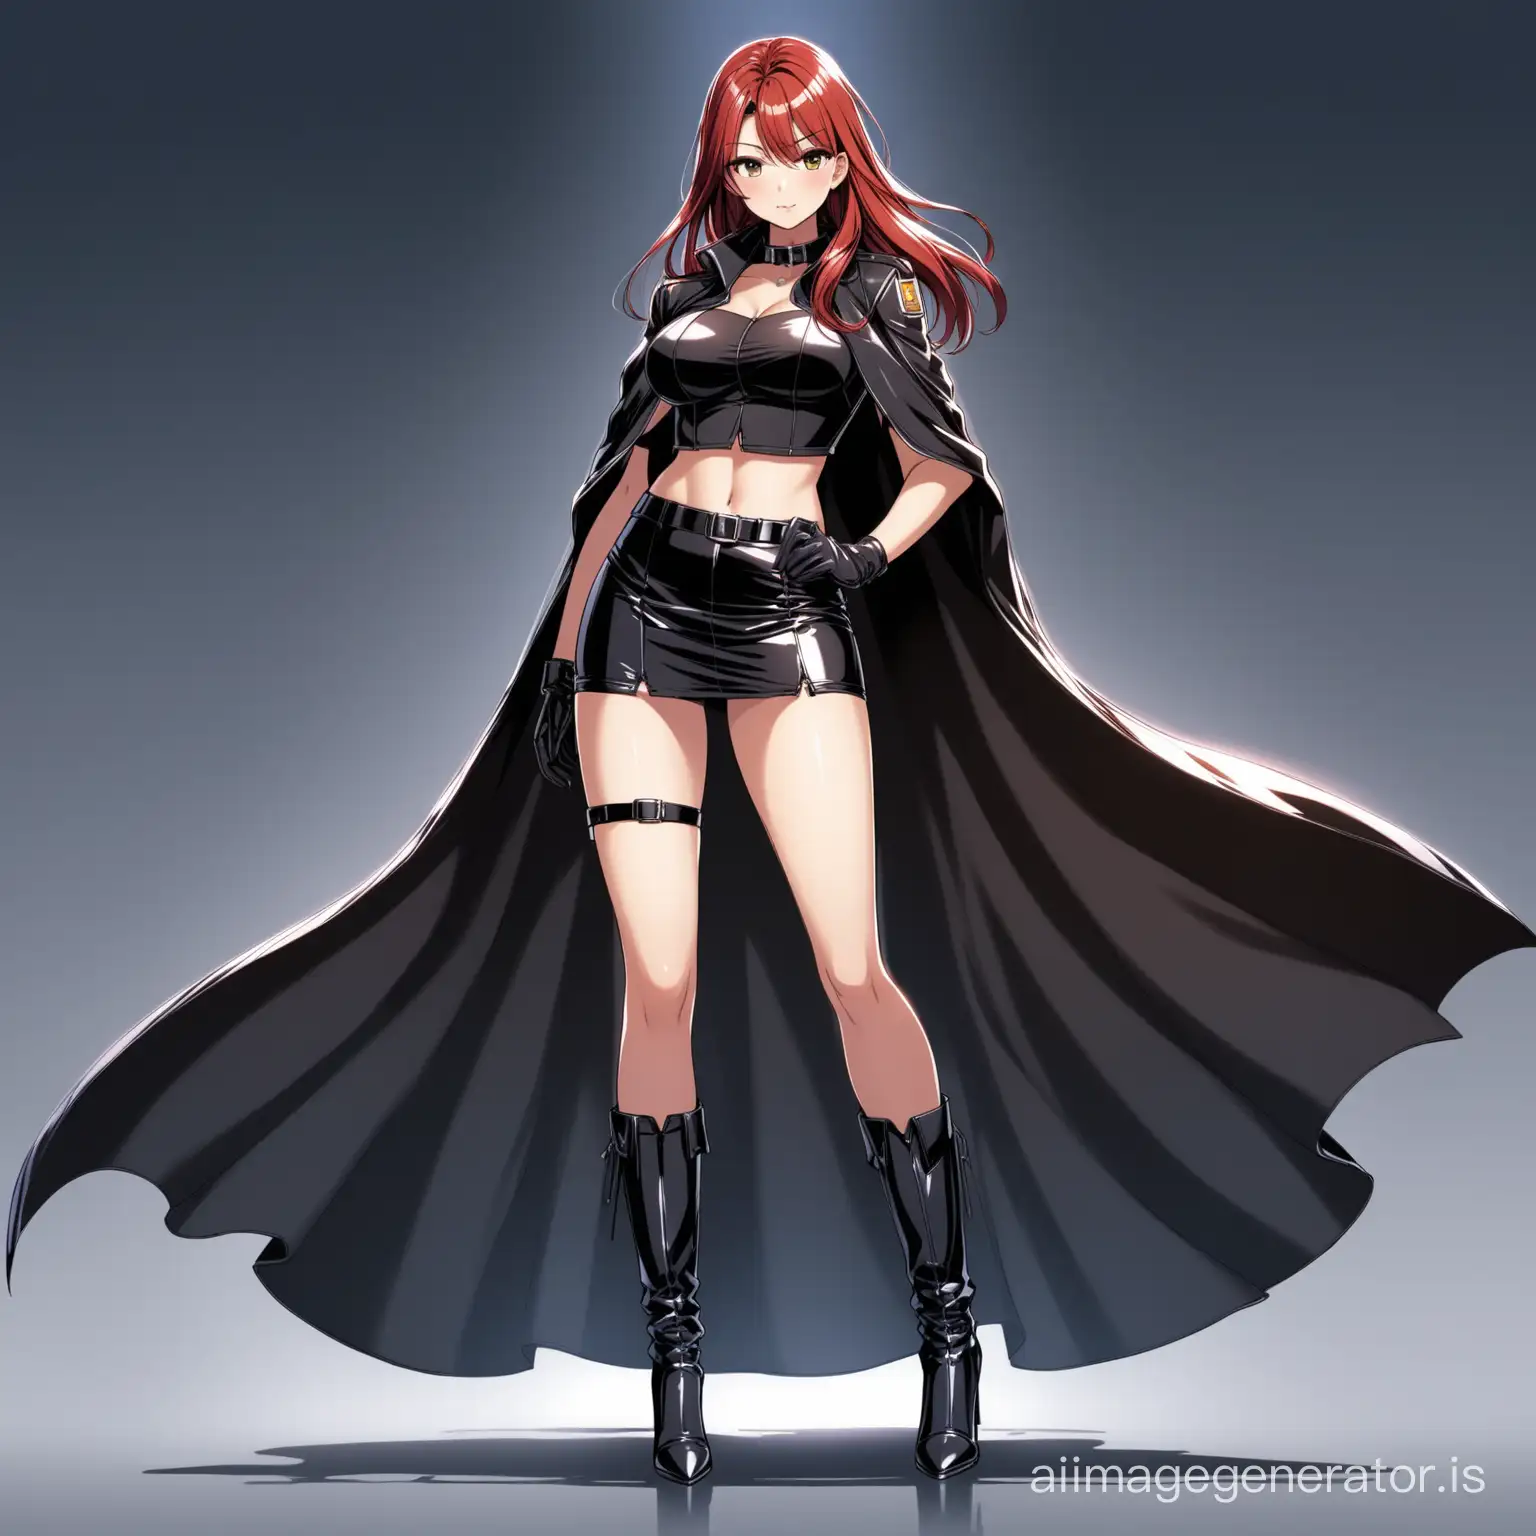 hot anime girl in a beautiful secret agent outfit wearing a croptop, skirt, long leather gloves, long leather boots heels and a long cape with collar